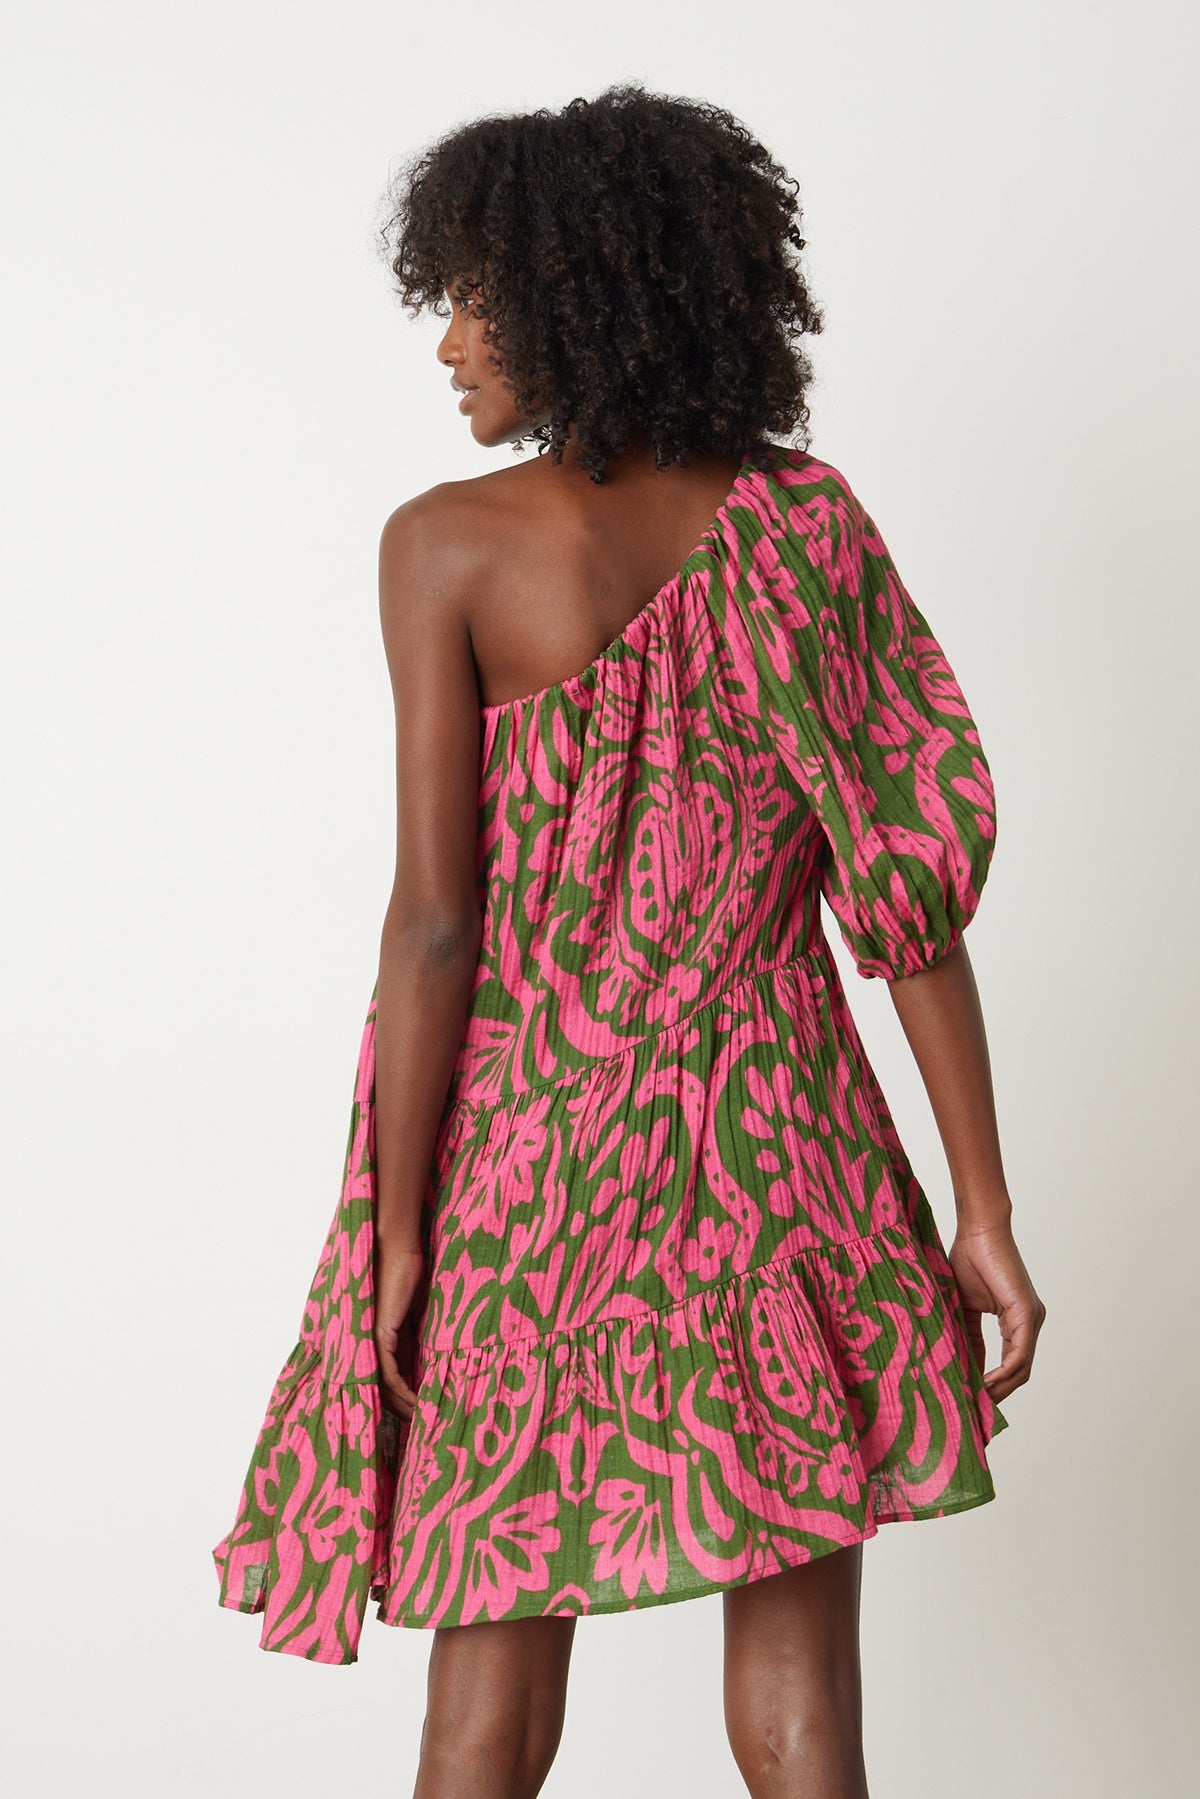   The back view of a woman wearing a Velvet by Graham & Spencer Gretchen Printed One Shoulder Dress in pink and green print. 